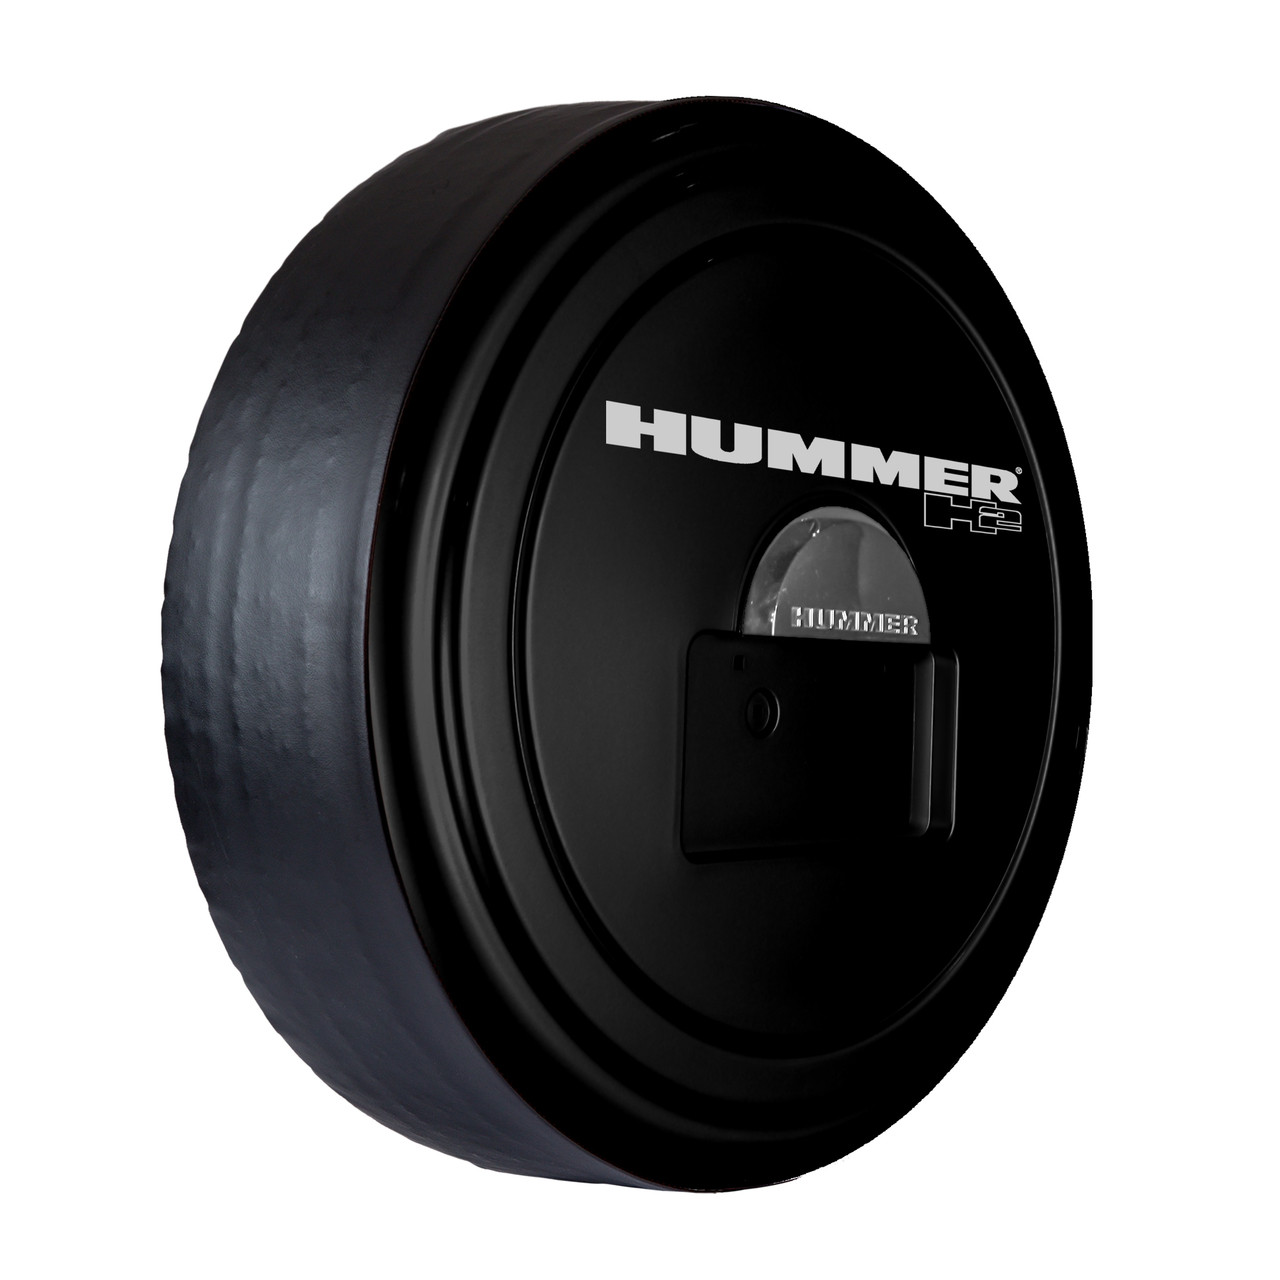 2005-2010 Hummer H2 Rigid Tire Cover by Boomerang Official GM Licensed Hummer  Tire Covers